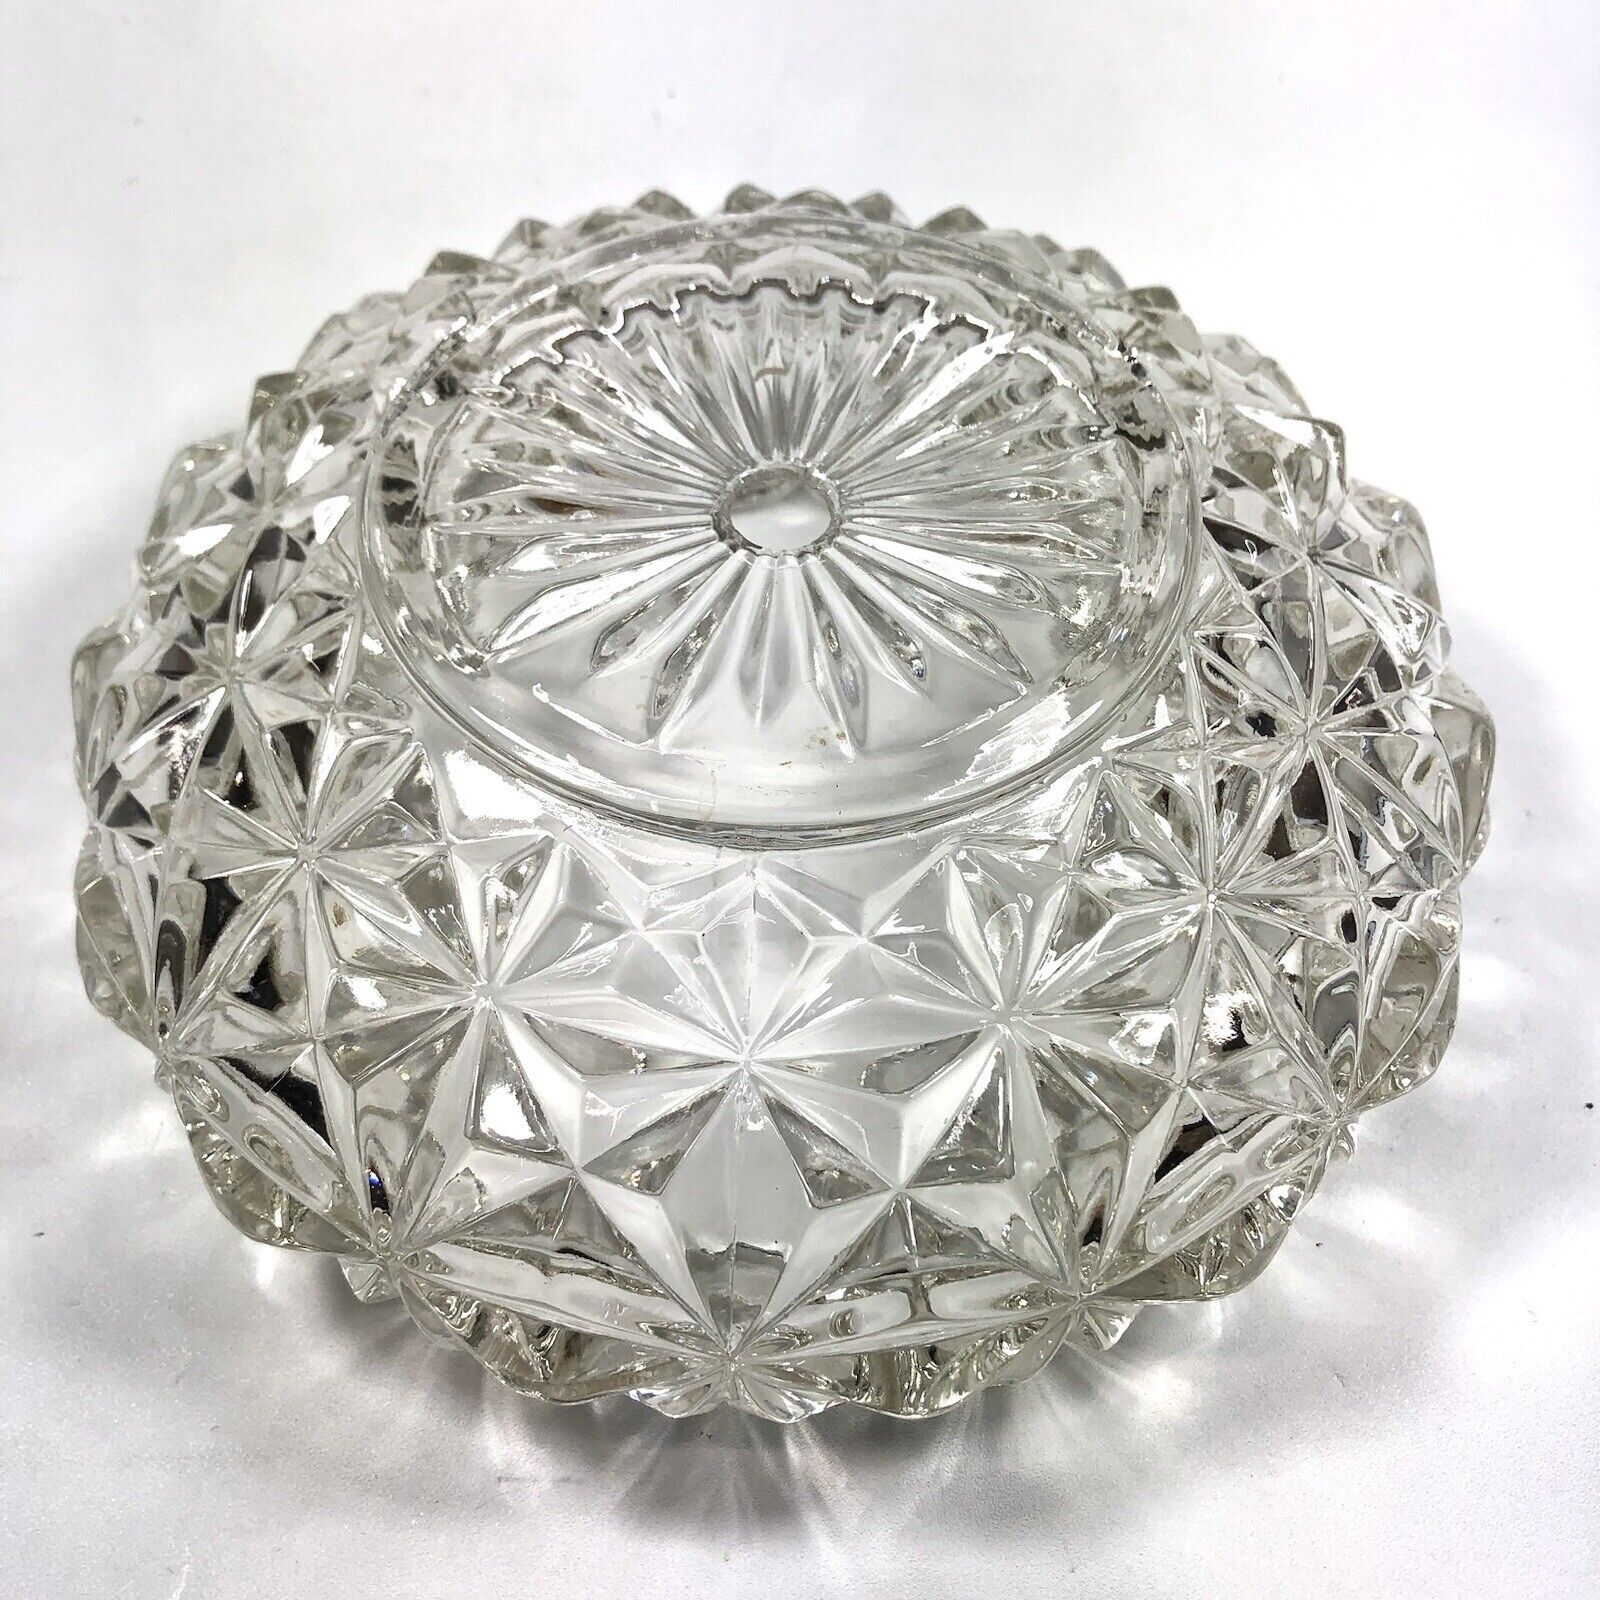 Crystal Clear Glass Ceiling Light Fixture Globe/Shade Antique 8x3 Inches